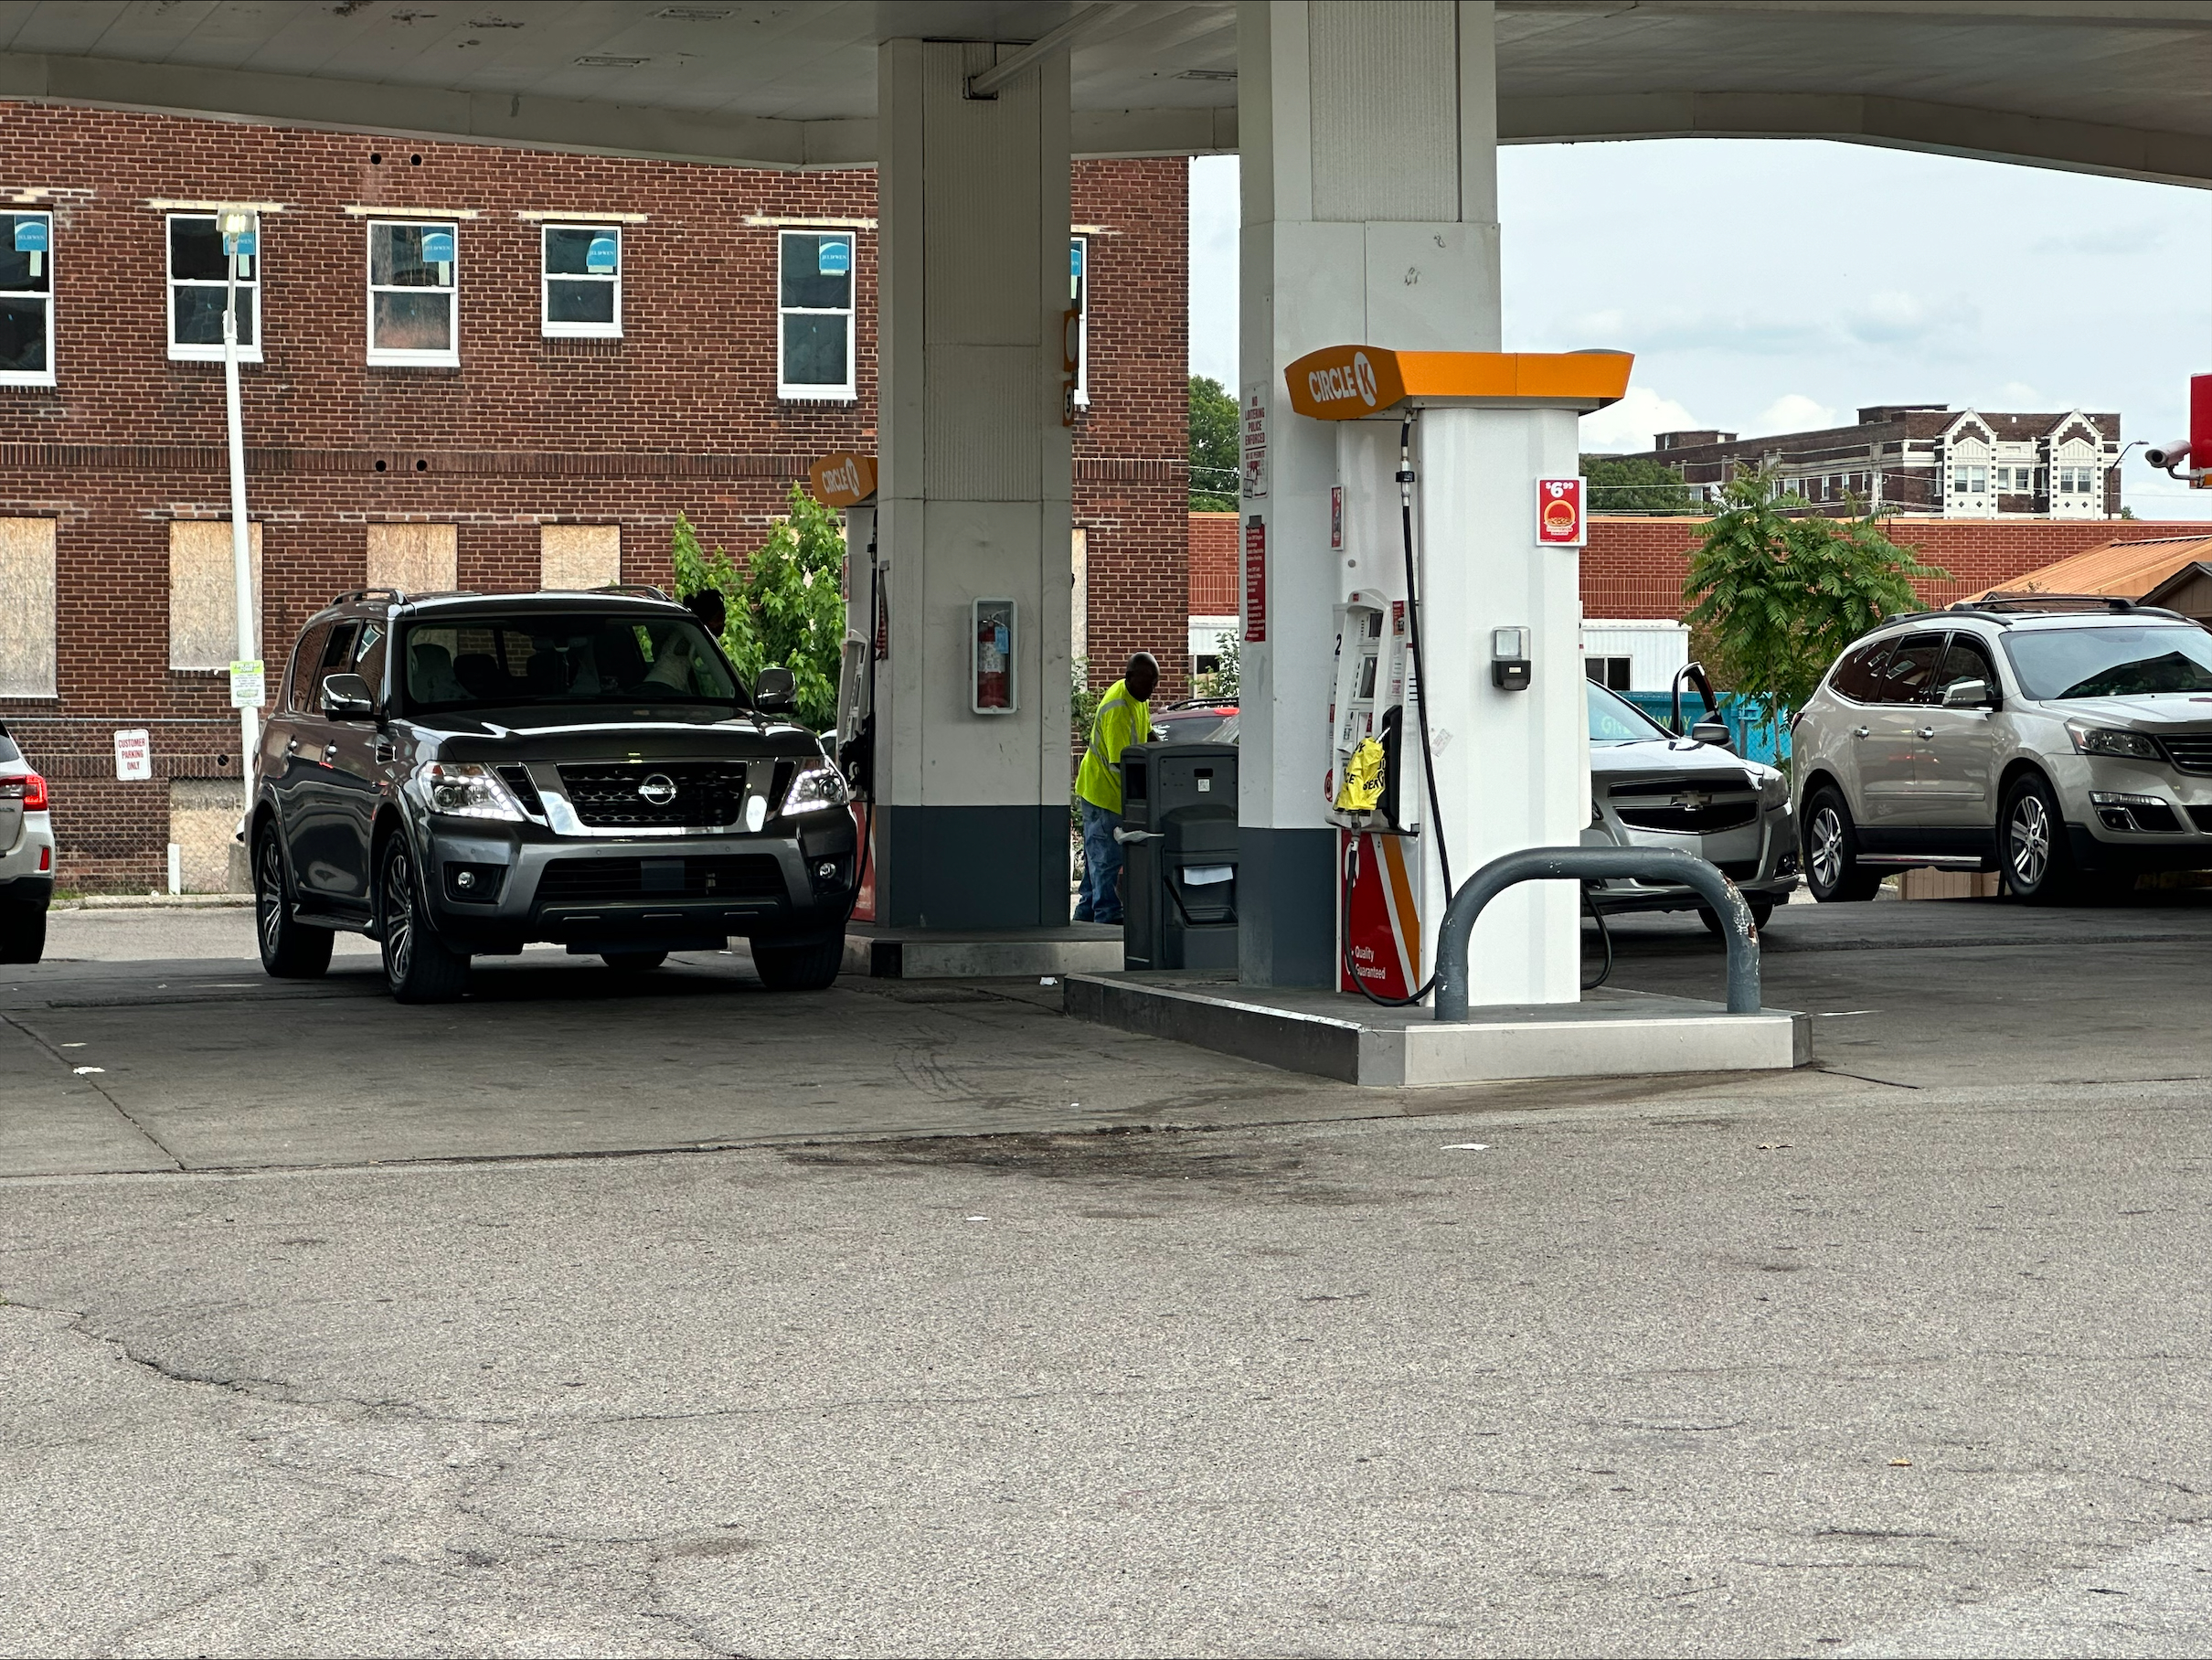 Circle K, the global convenience store chain, on May 23, 2204, lowered gas prices by 40 cents per gallon natiionally between 4 p.m. and 7 p.m. local time. Here is a view from the station at 16th and Illinois streets in Indianapolis. (WISH Photo/Jason Ronimous)